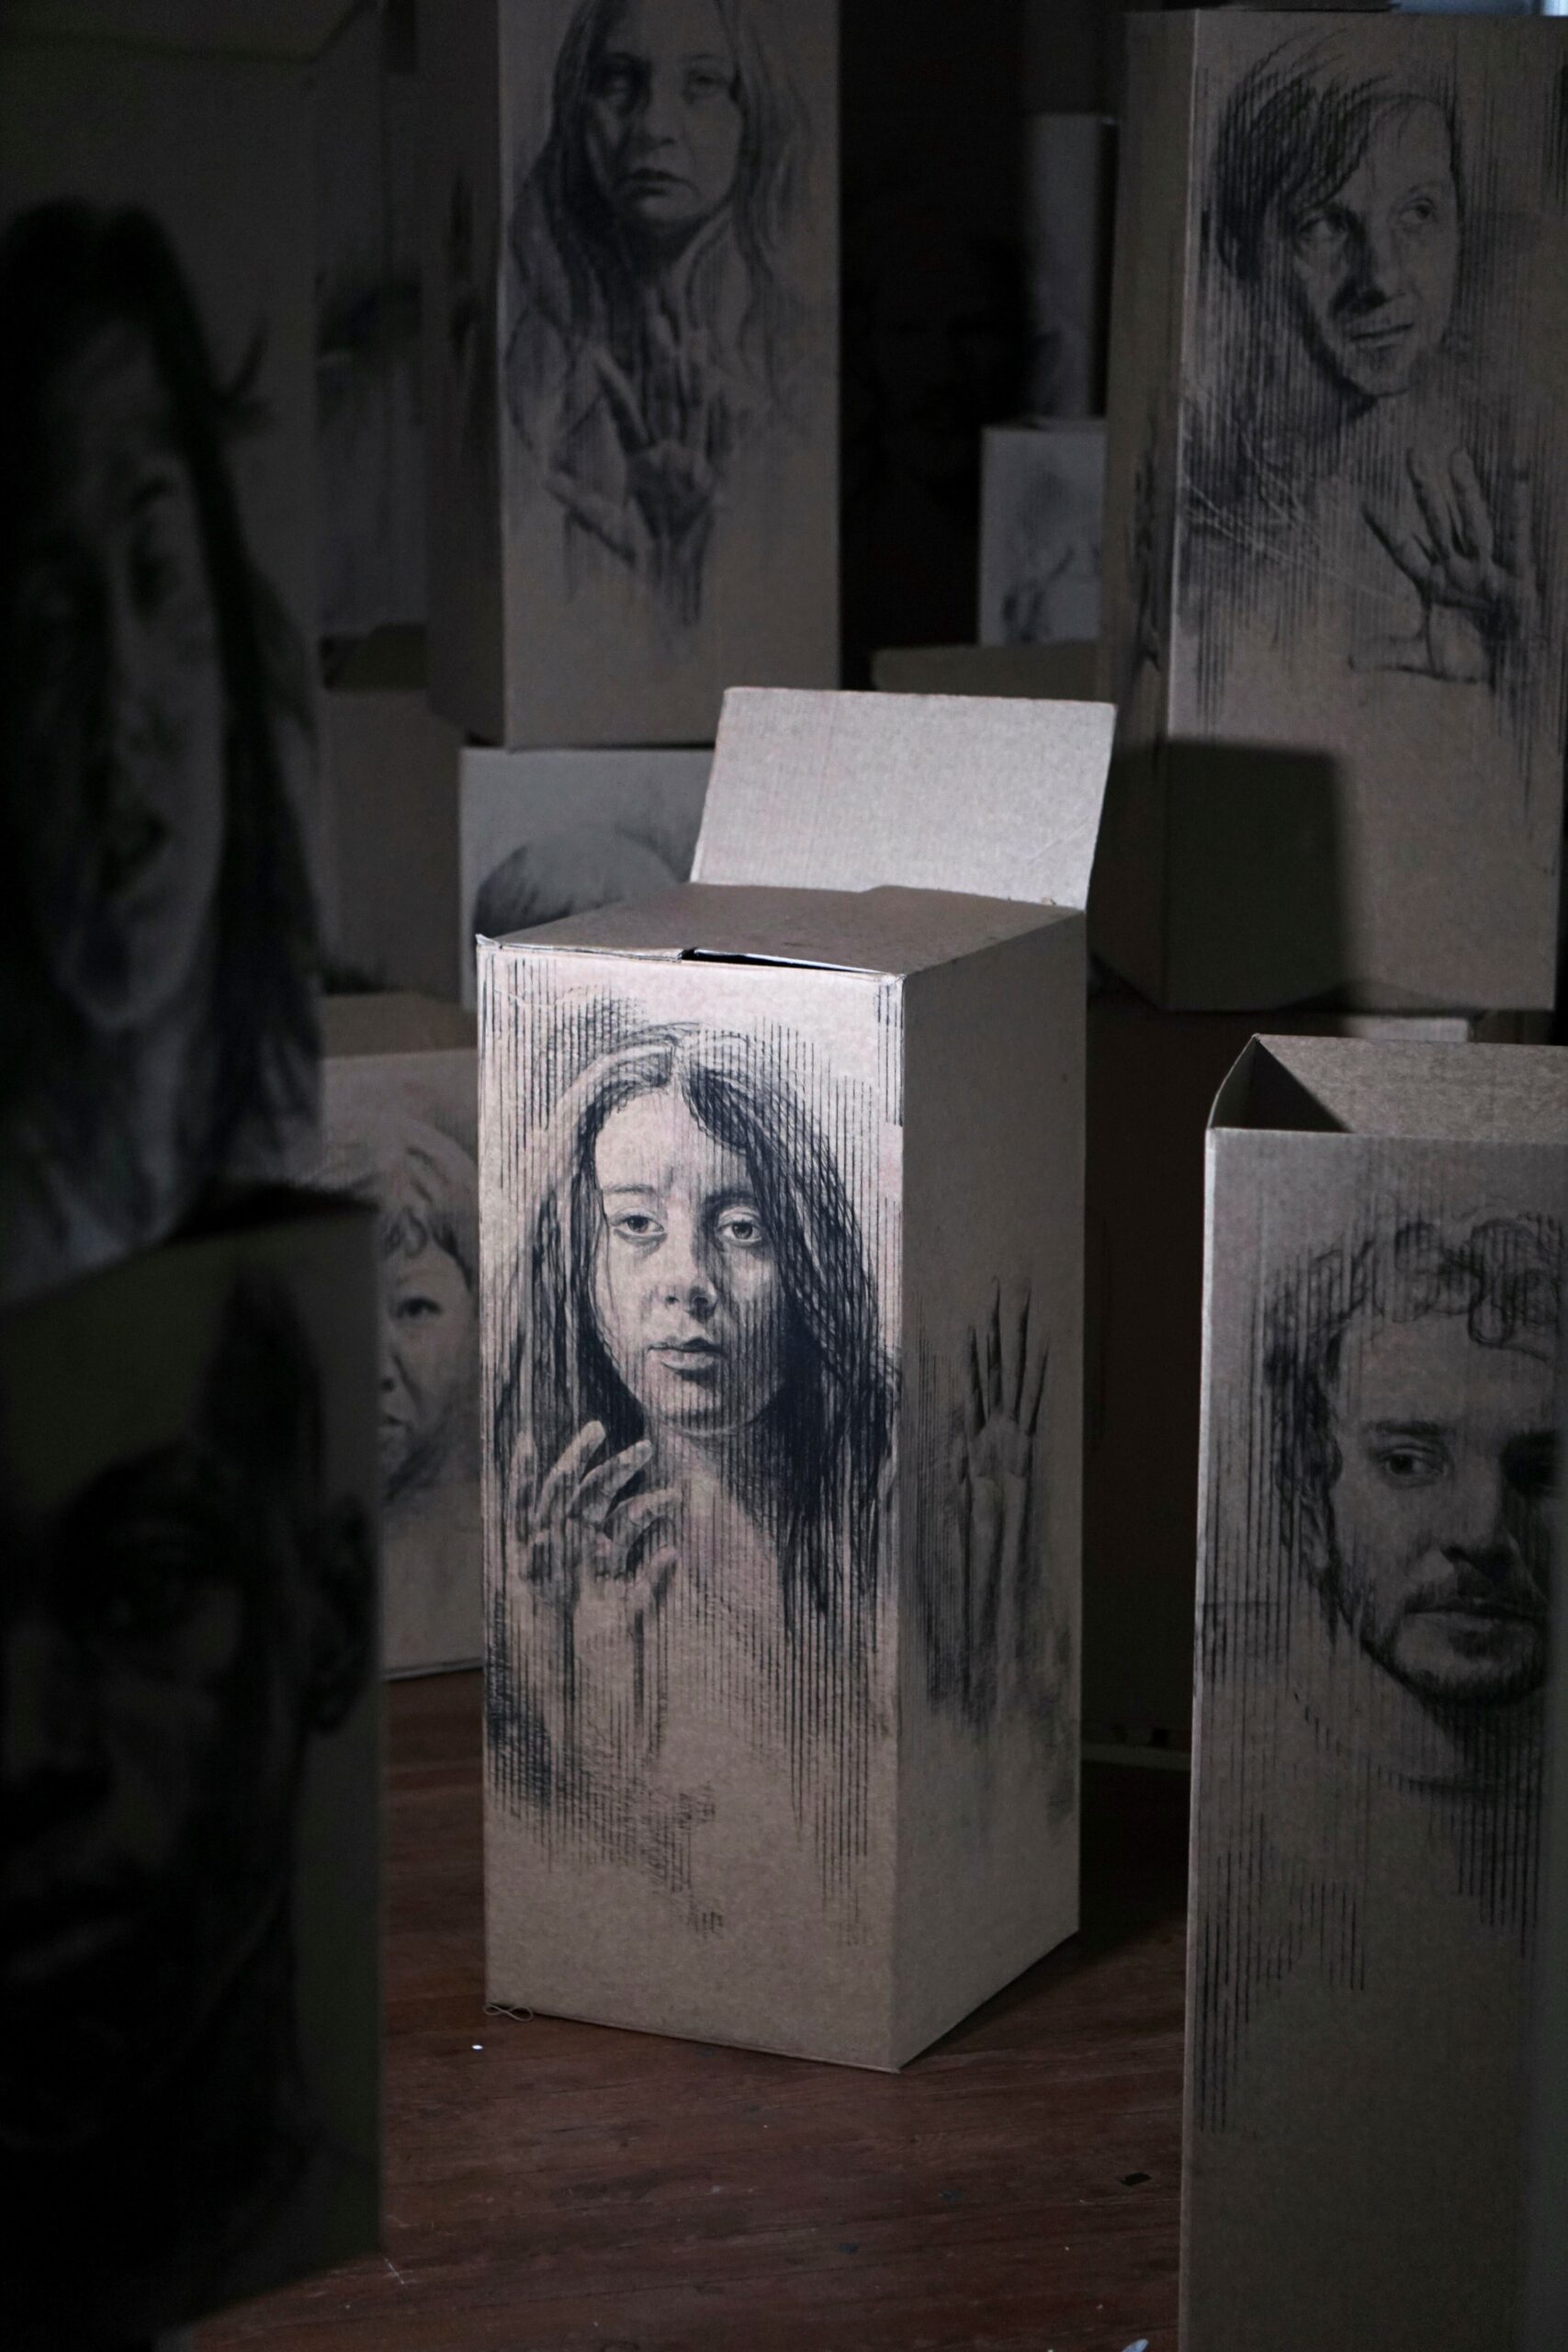 A charcoal drawing of a young woman on a cardboard box